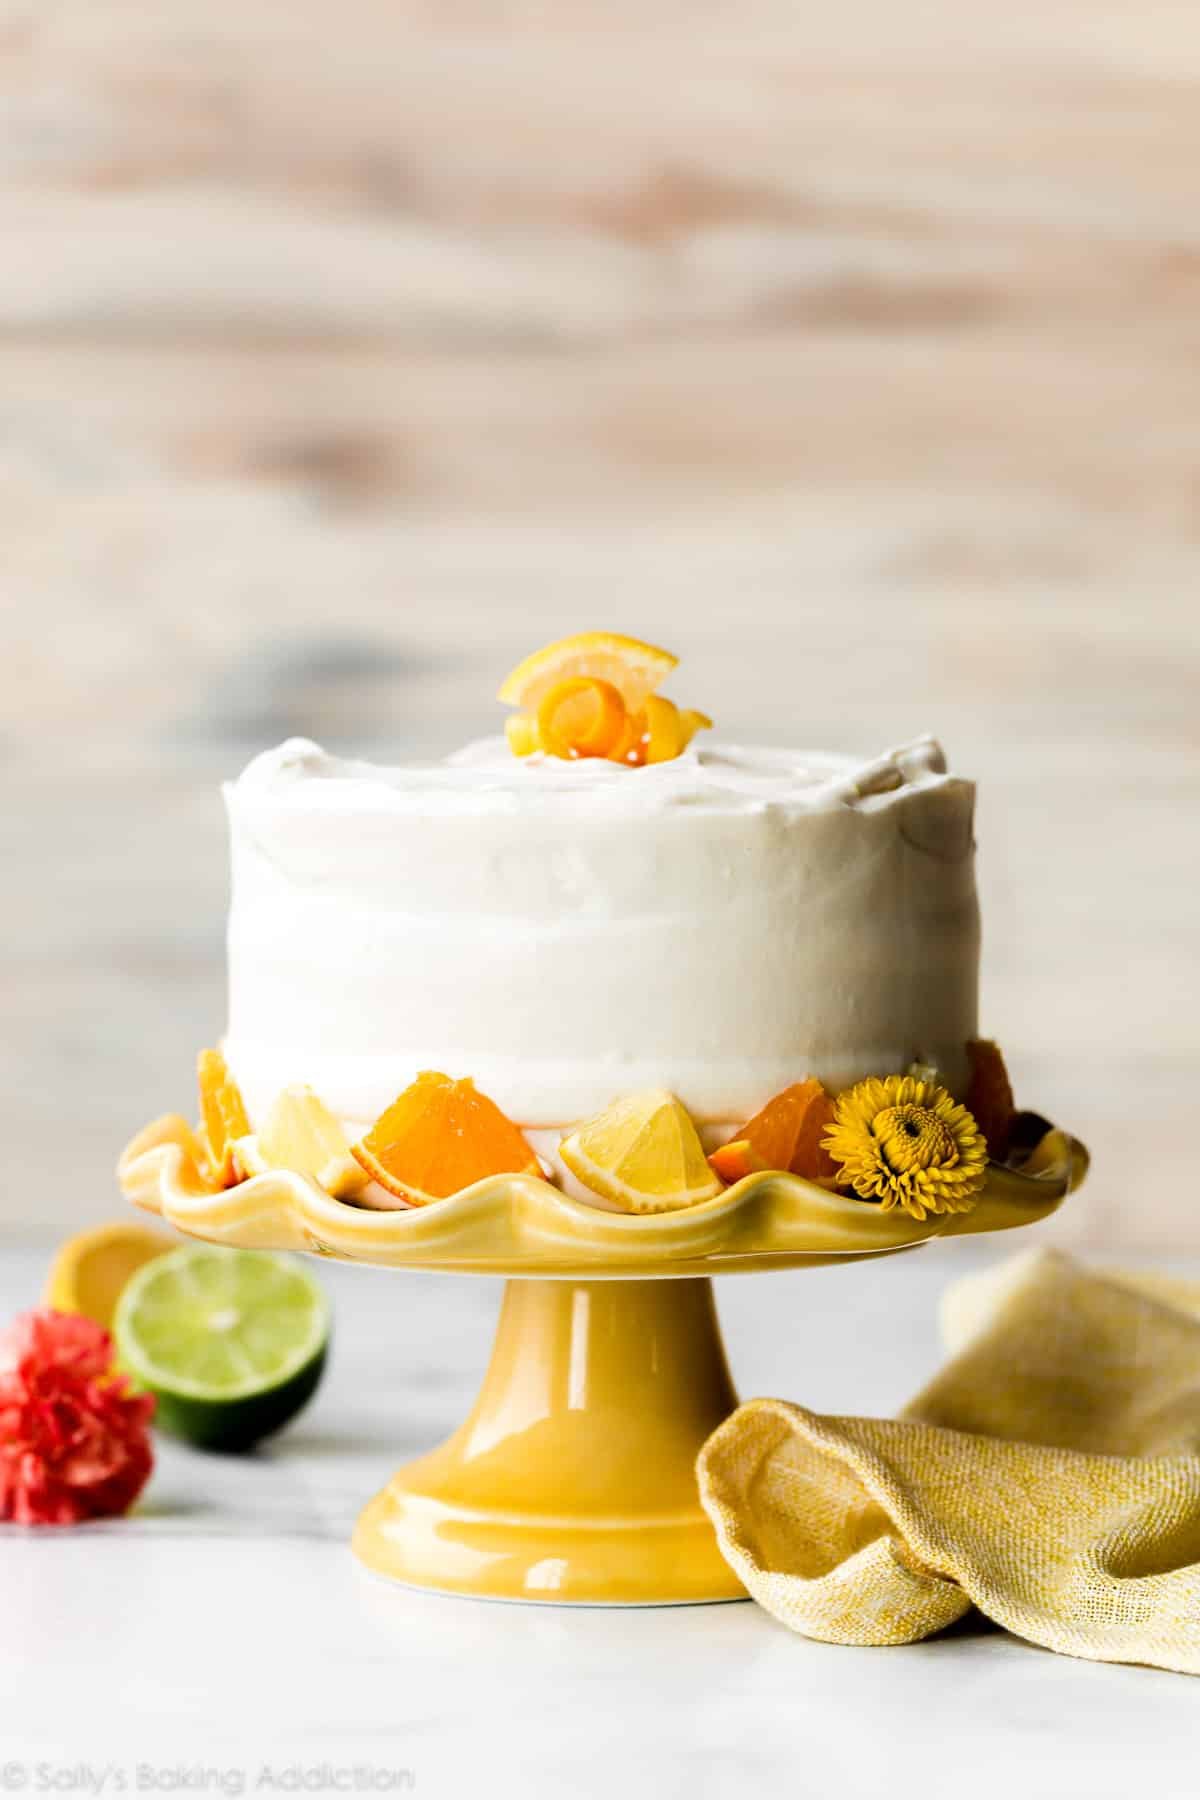 6 inch cake with whipped frosting and citrus fruits sitting on a yellow cake stand